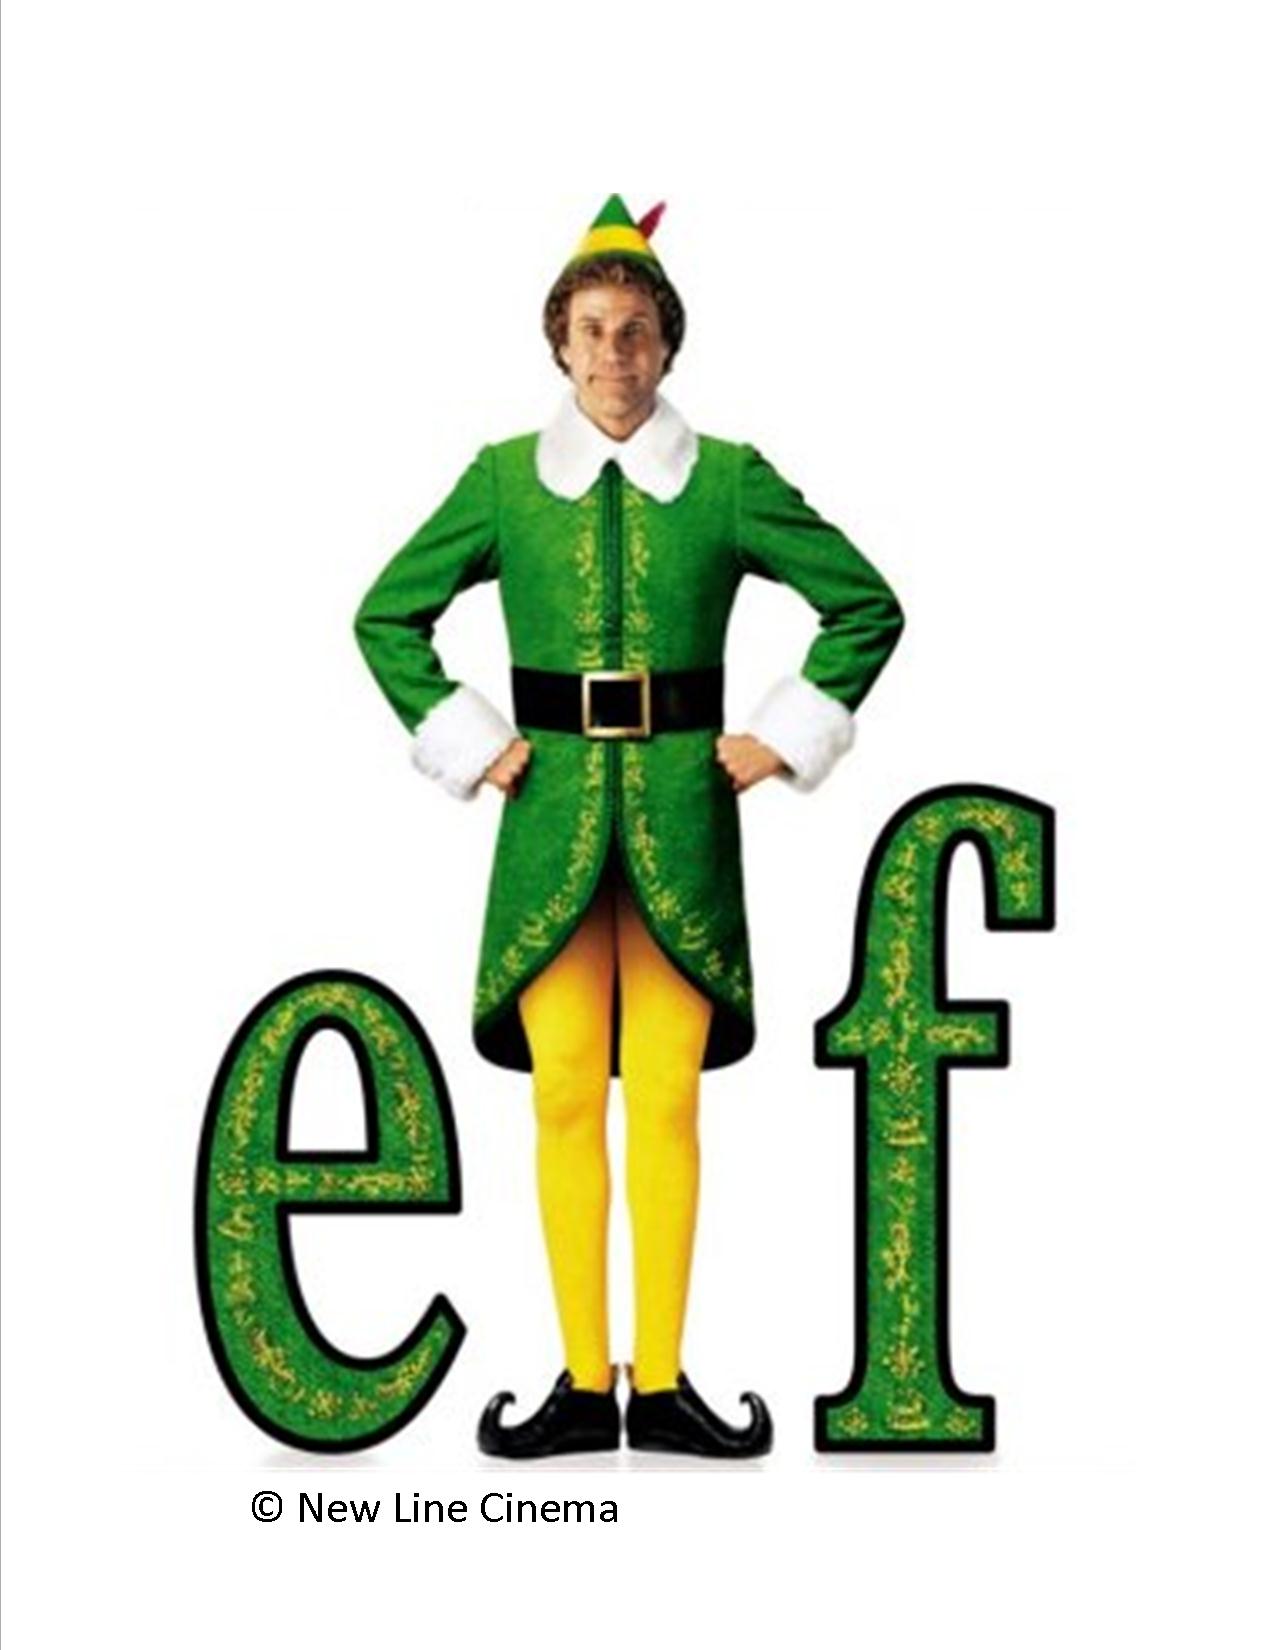 Free Buddy The Elf Png, Download Free Buddy The Elf Png png images ...